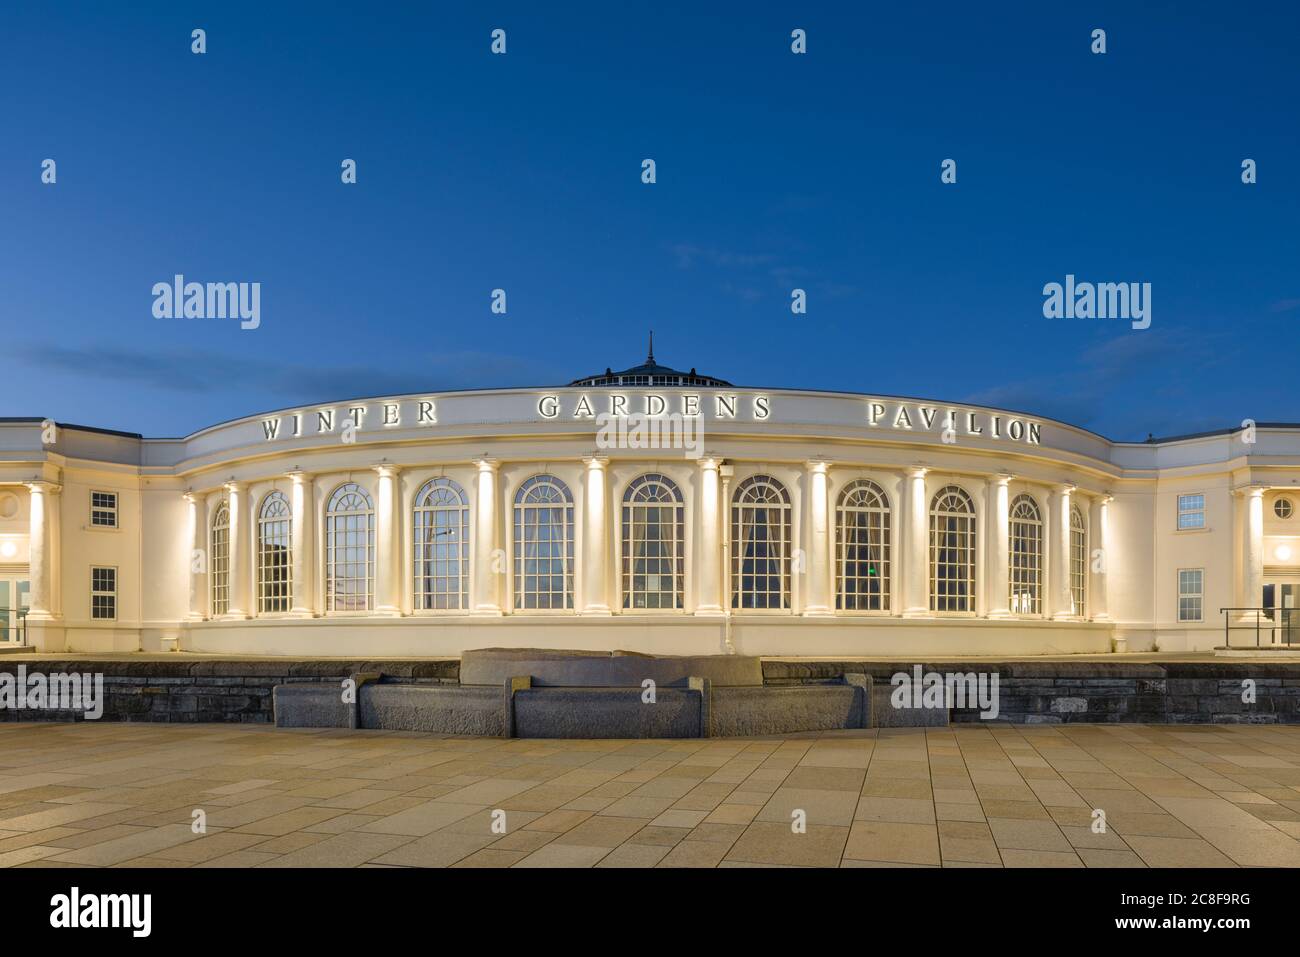 The Winter Gardens Pavilion on the seafront at Weston-super-Mare, North Somerset, England. Stock Photo